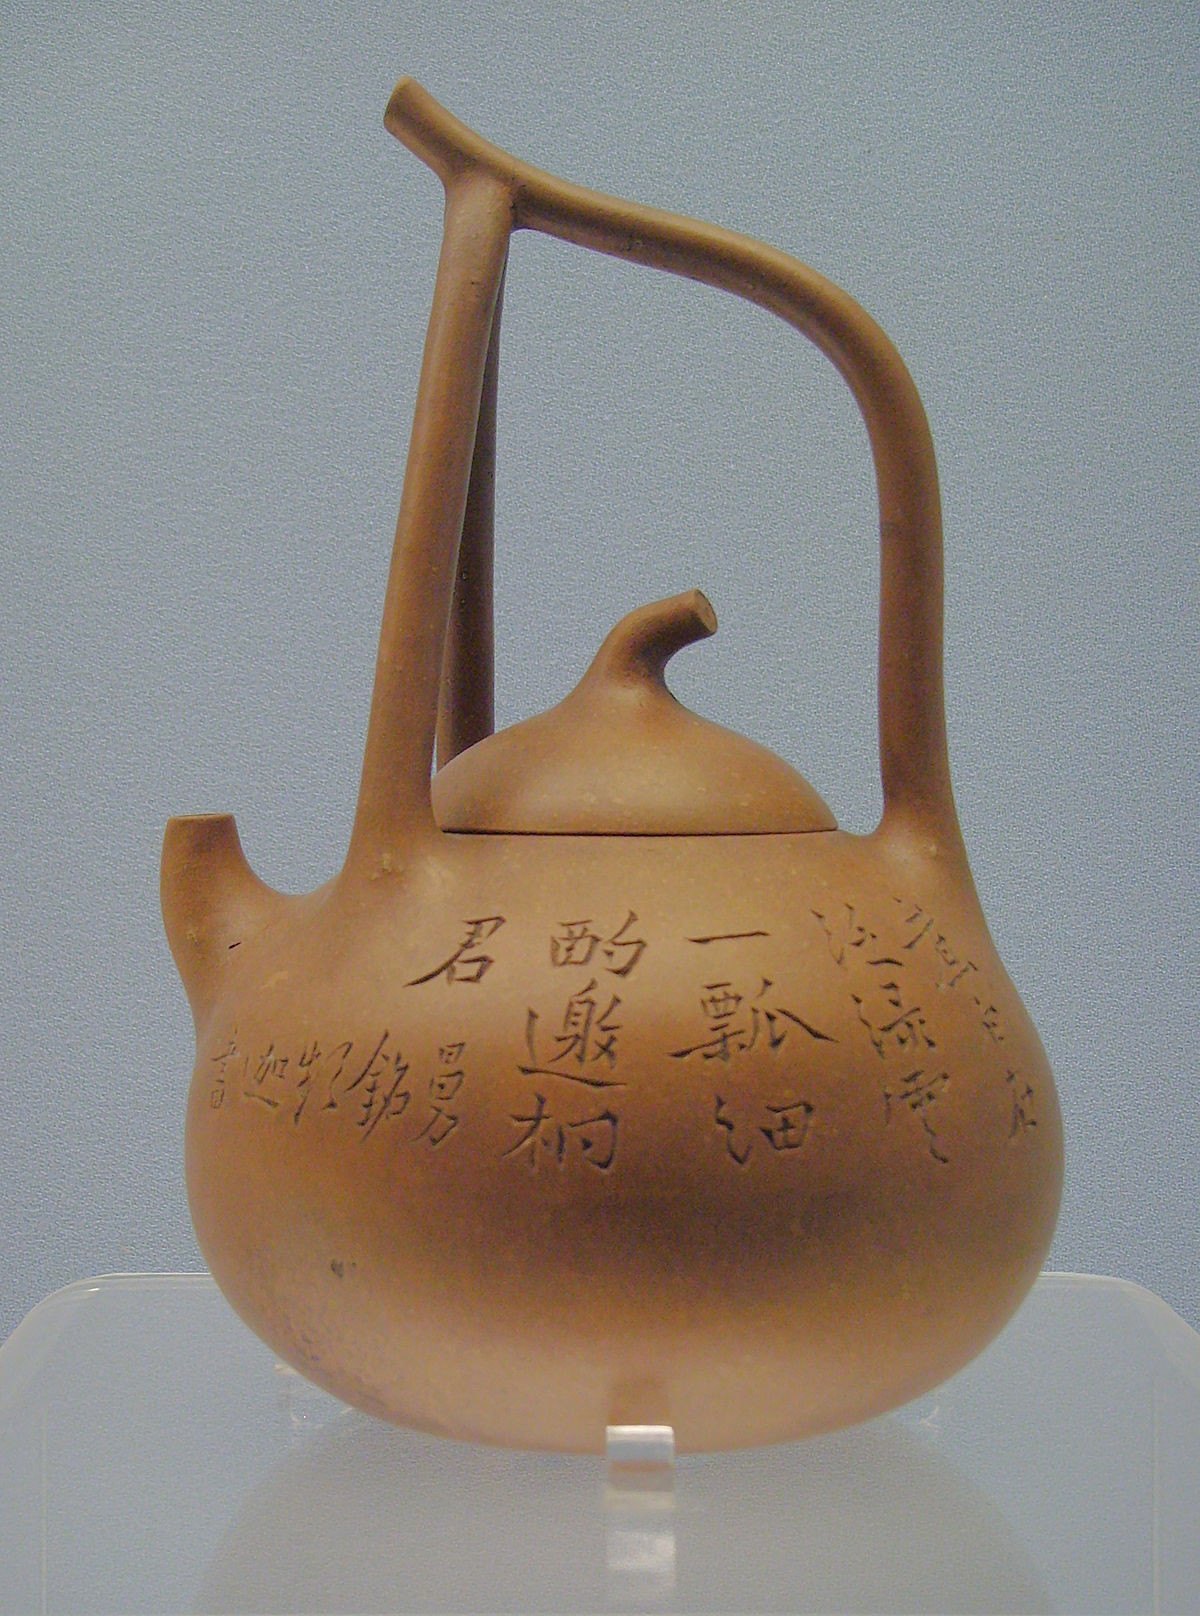 29 Perfect Three Hands Corp Ceramic Vase 2024 free download three hands corp ceramic vase of yixing clay teapot wikipedia within 1200px teapot yixing ware about 1900 jpg